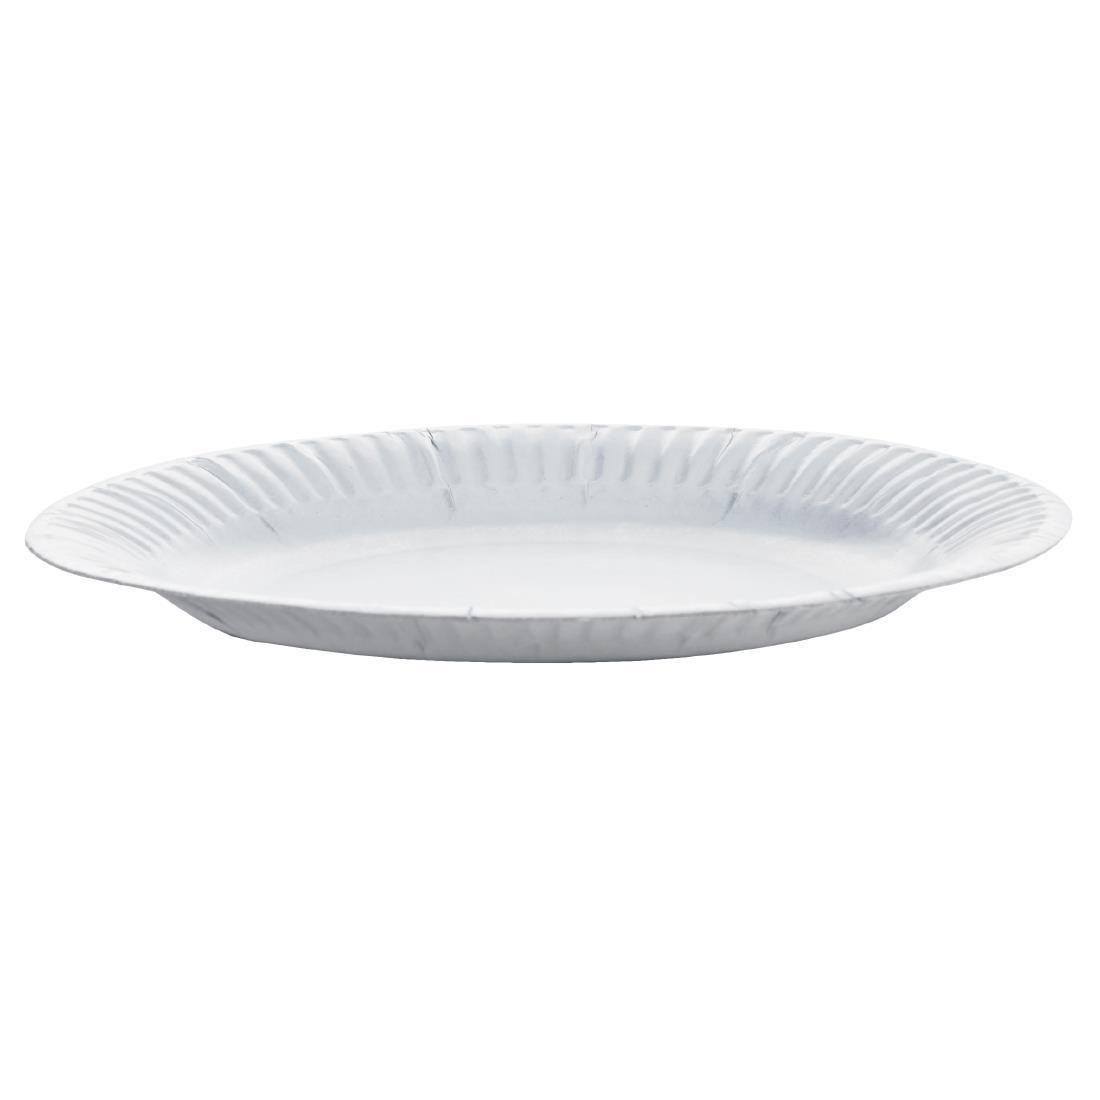 Paper Plates 229mm (Pack of 1000)